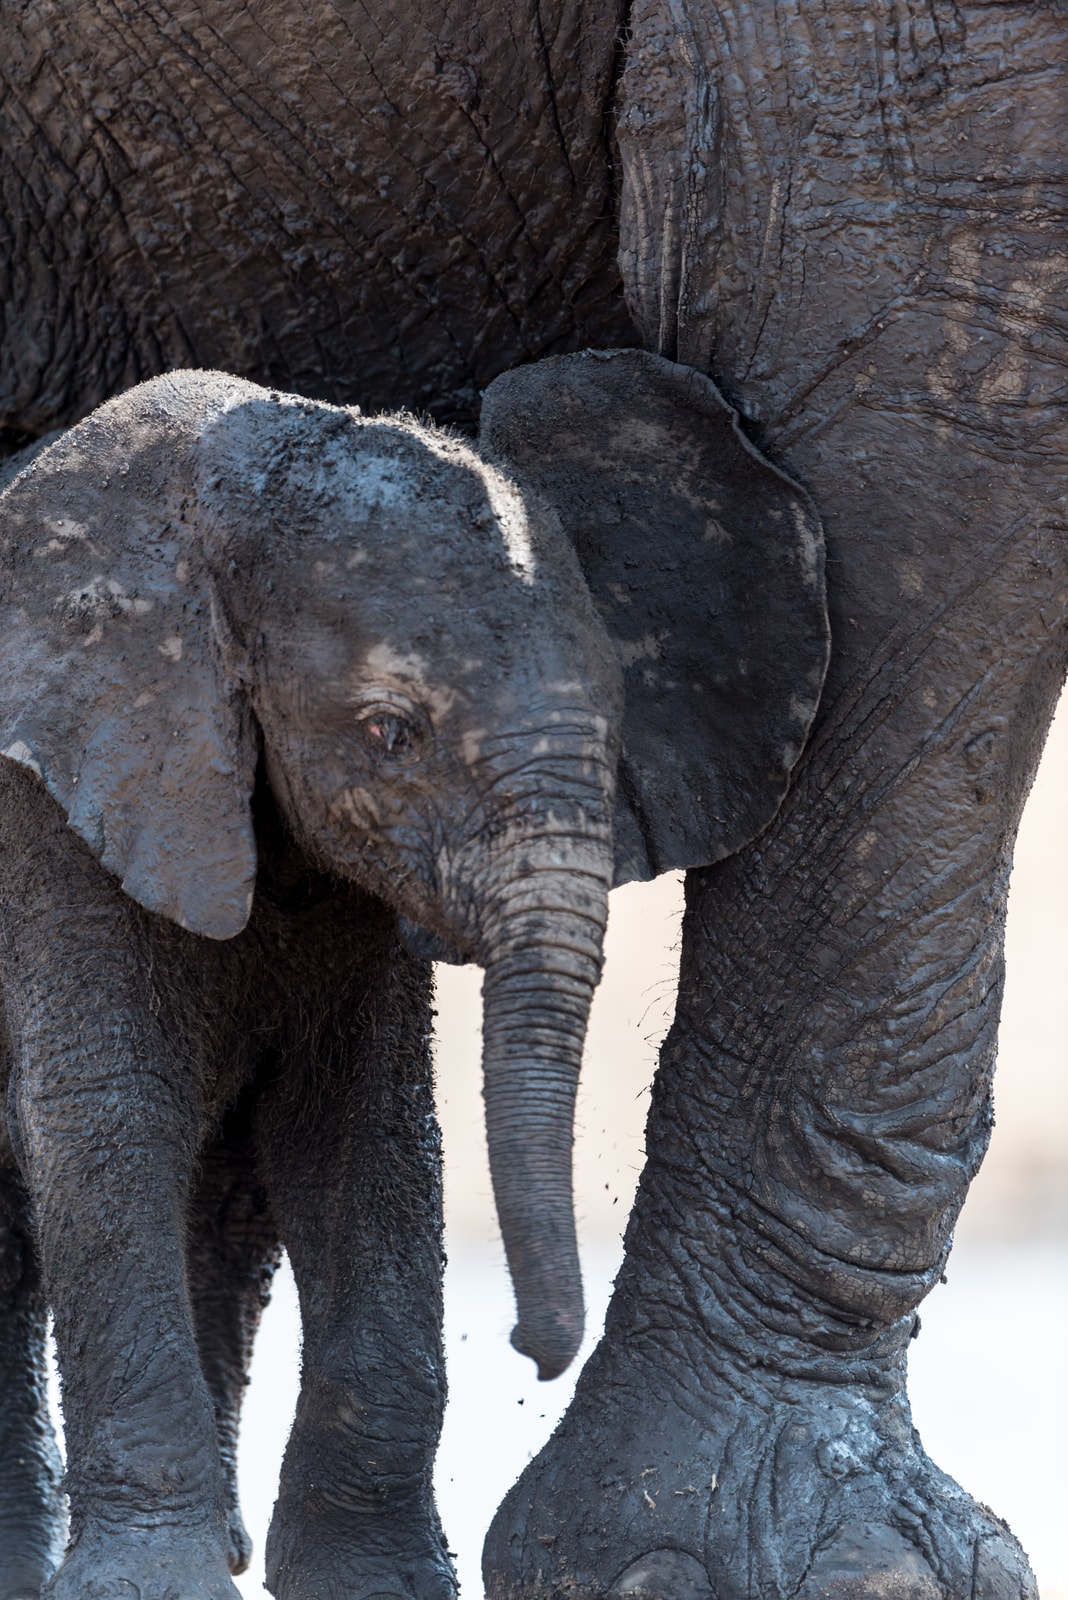 Funny Elephant Puns That Will Make You Trumpet with Laughter